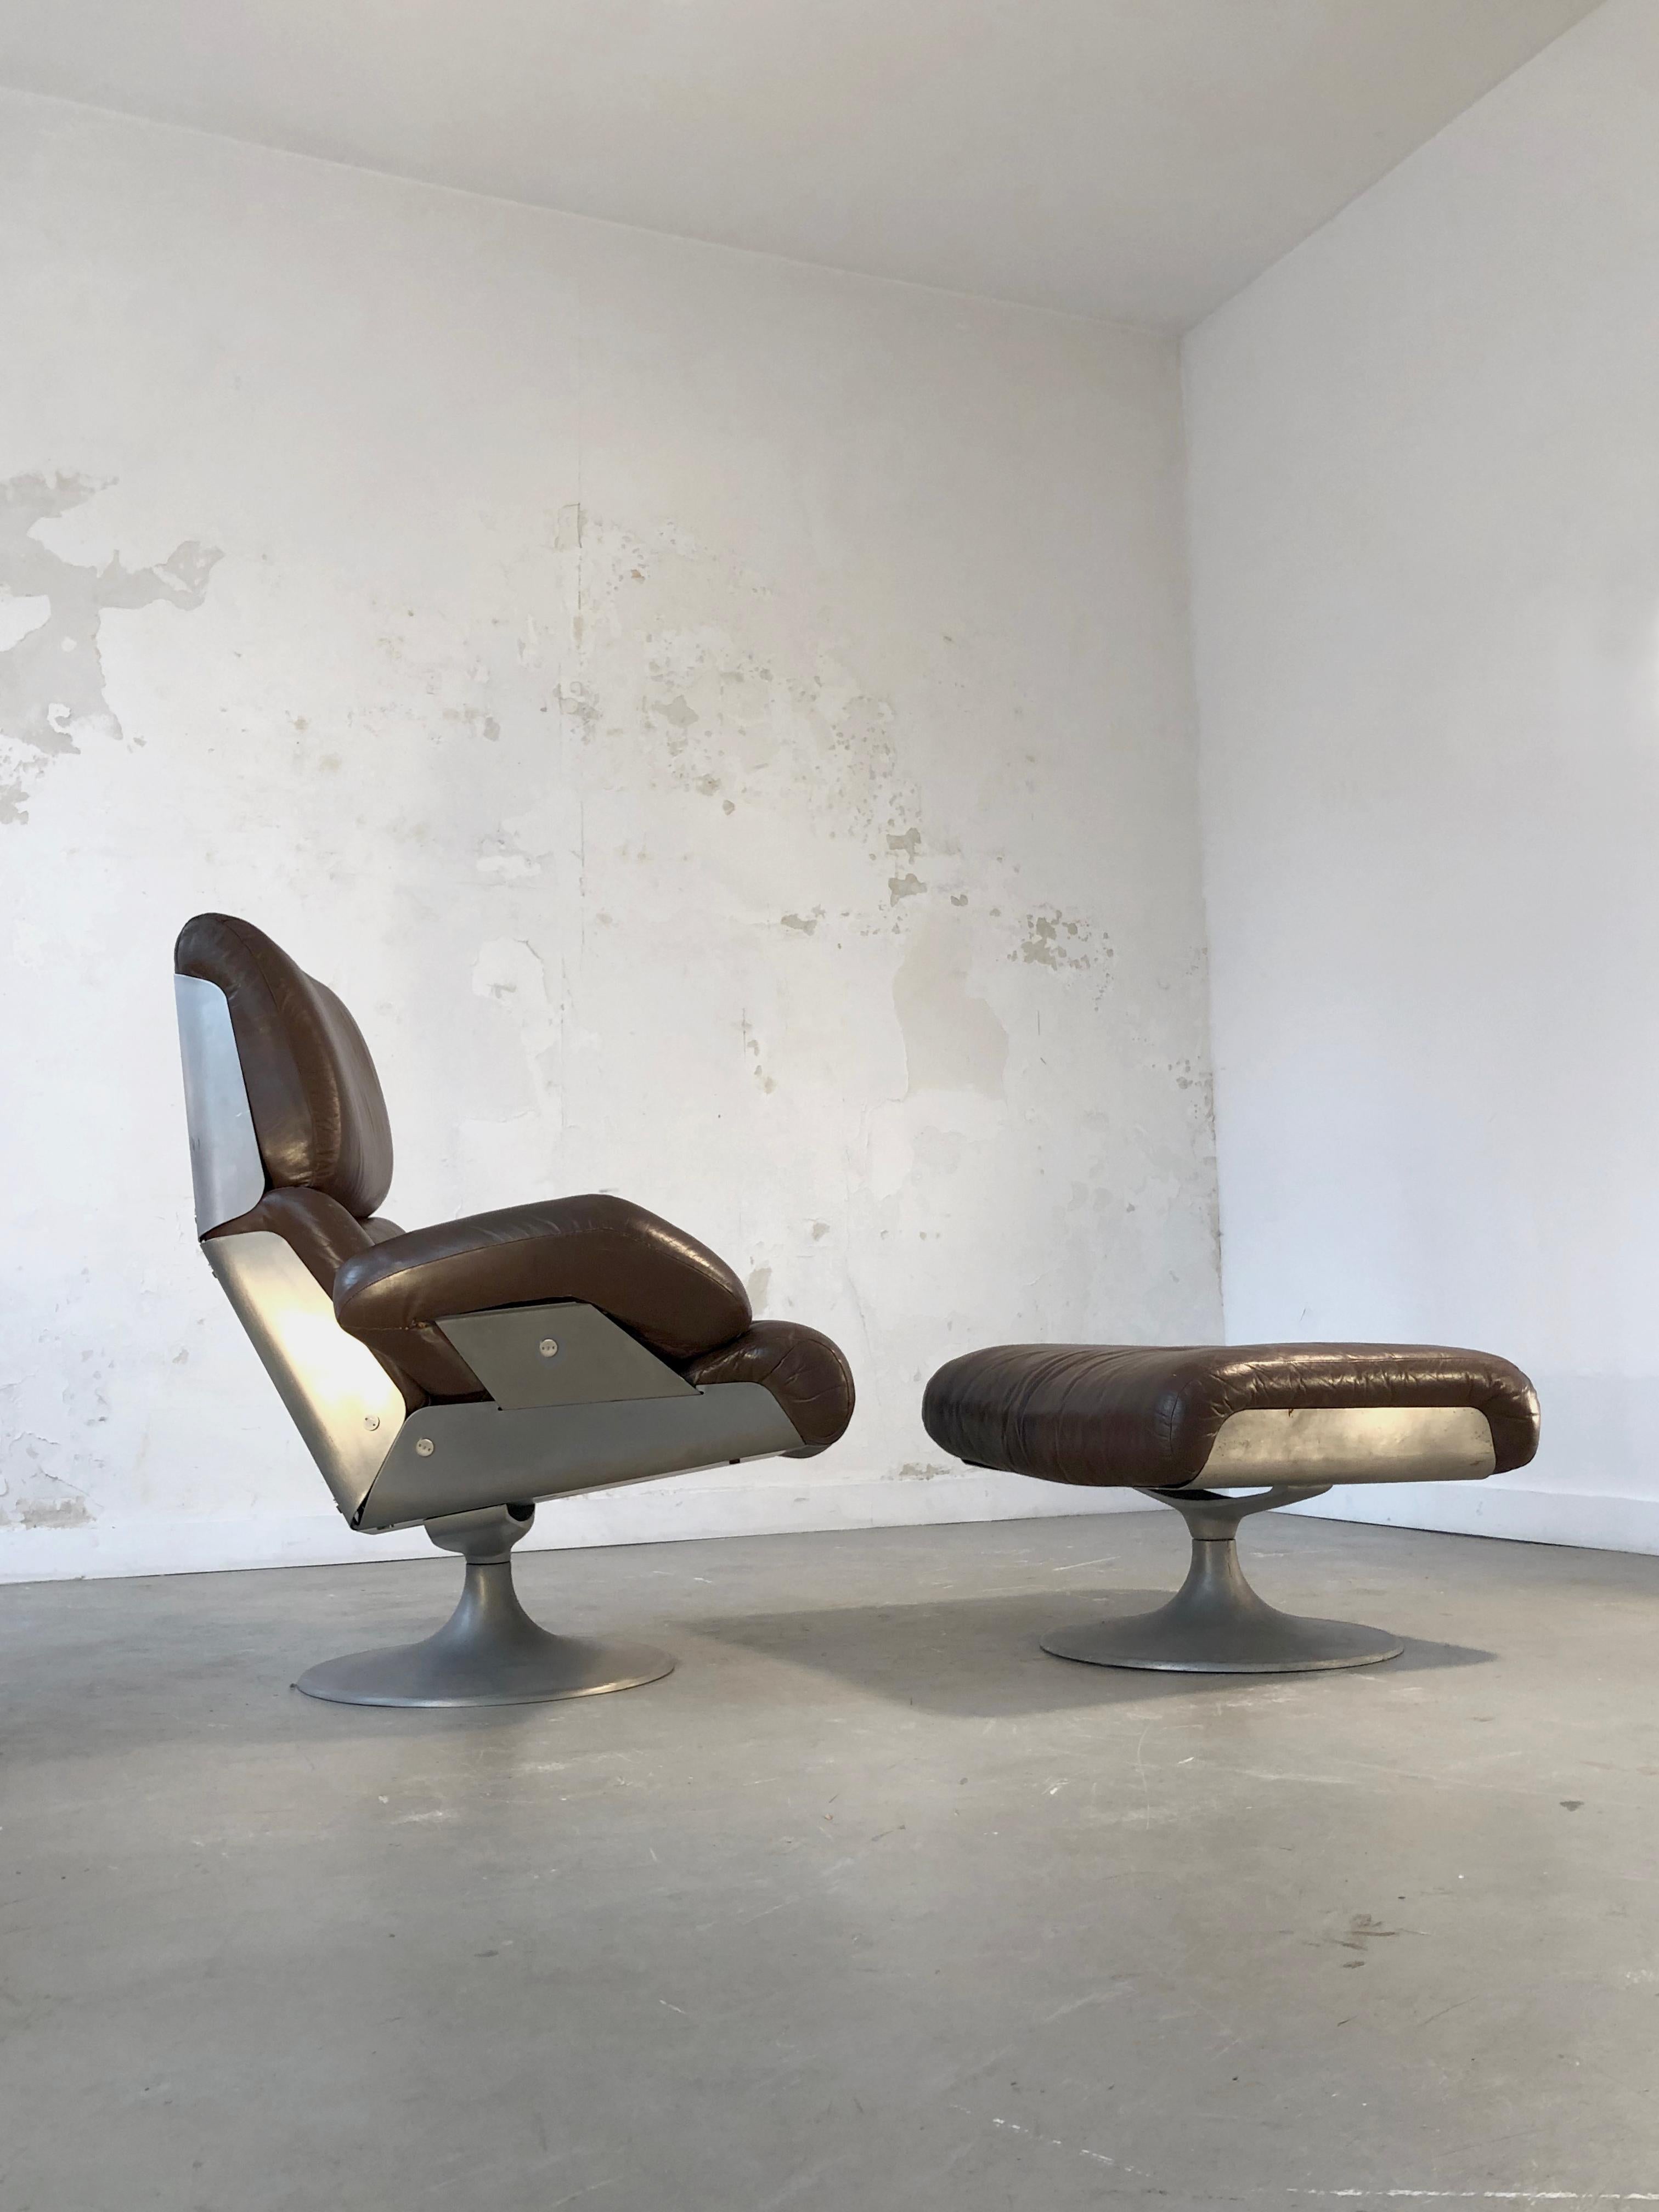 An exceptional lounge chair in stainless steel completed by brown original leather cushions; post-modern, space age, pop, by French interior architect Xavier Féal, France 1970.
Both radical and modern, futuristic but comfortable, Féal's designs are